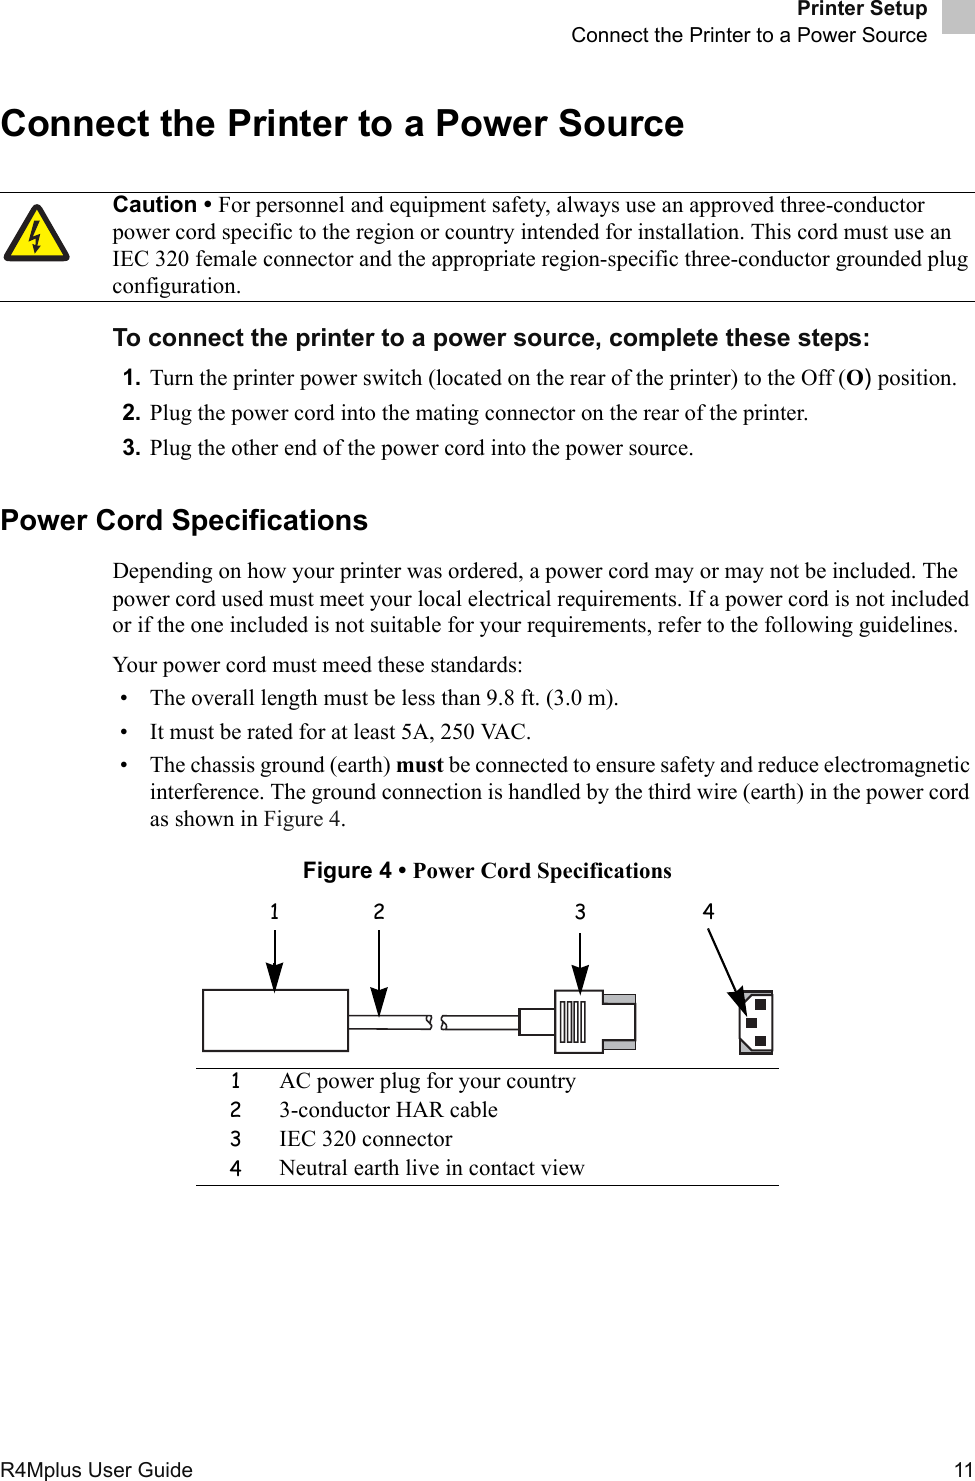 Printer SetupConnect the Printer to a Power SourceR4Mplus User Guide  11Connect the Printer to a Power SourceTo connect the printer to a power source, complete these steps:1. Turn the printer power switch (located on the rear of the printer) to the Off (O) position.2. Plug the power cord into the mating connector on the rear of the printer.3. Plug the other end of the power cord into the power source.Power Cord SpecificationsDepending on how your printer was ordered, a power cord may or may not be included. The power cord used must meet your local electrical requirements. If a power cord is not included or if the one included is not suitable for your requirements, refer to the following guidelines.Your power cord must meed these standards:• The overall length must be less than 9.8 ft. (3.0 m).• It must be rated for at least 5A, 250 VAC.• The chassis ground (earth) must be connected to ensure safety and reduce electromagnetic interference. The ground connection is handled by the third wire (earth) in the power cord as shown in Figure 4.Figure 4 • Power Cord SpecificationsCaution • For personnel and equipment safety, always use an approved three-conductor power cord specific to the region or country intended for installation. This cord must use an IEC 320 female connector and the appropriate region-specific three-conductor grounded plug configuration.1AC power plug for your country23-conductor HAR cable3IEC 320 connector4Neutral earth live in contact view1 2 3 4